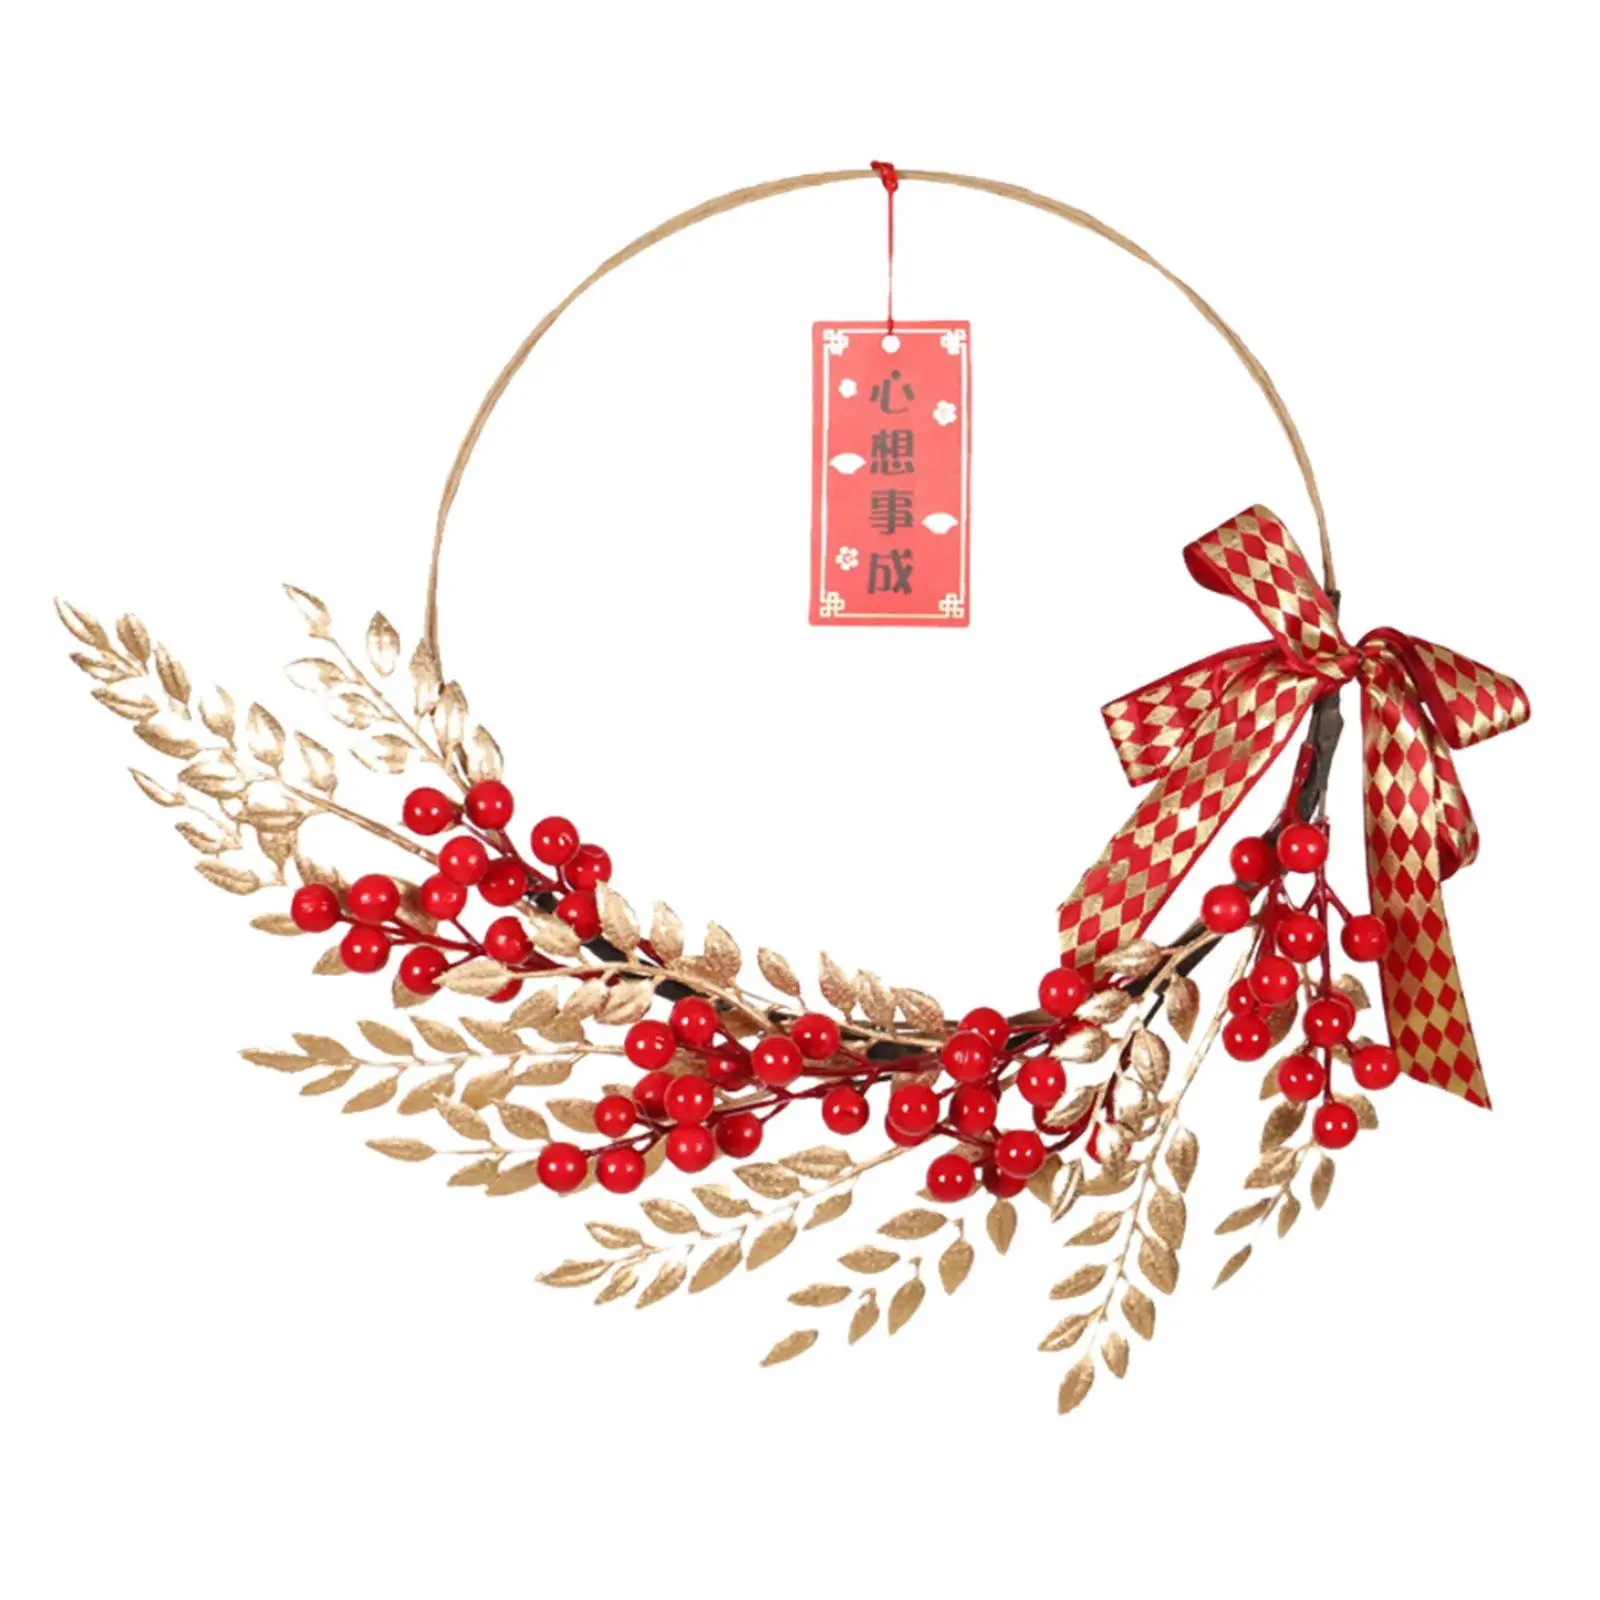 Hanging Red Berries Wreath Decoration Artificial Wire Loop Welcome Wreath for Front Door Porch New Year Holiday Thanksgiving Day